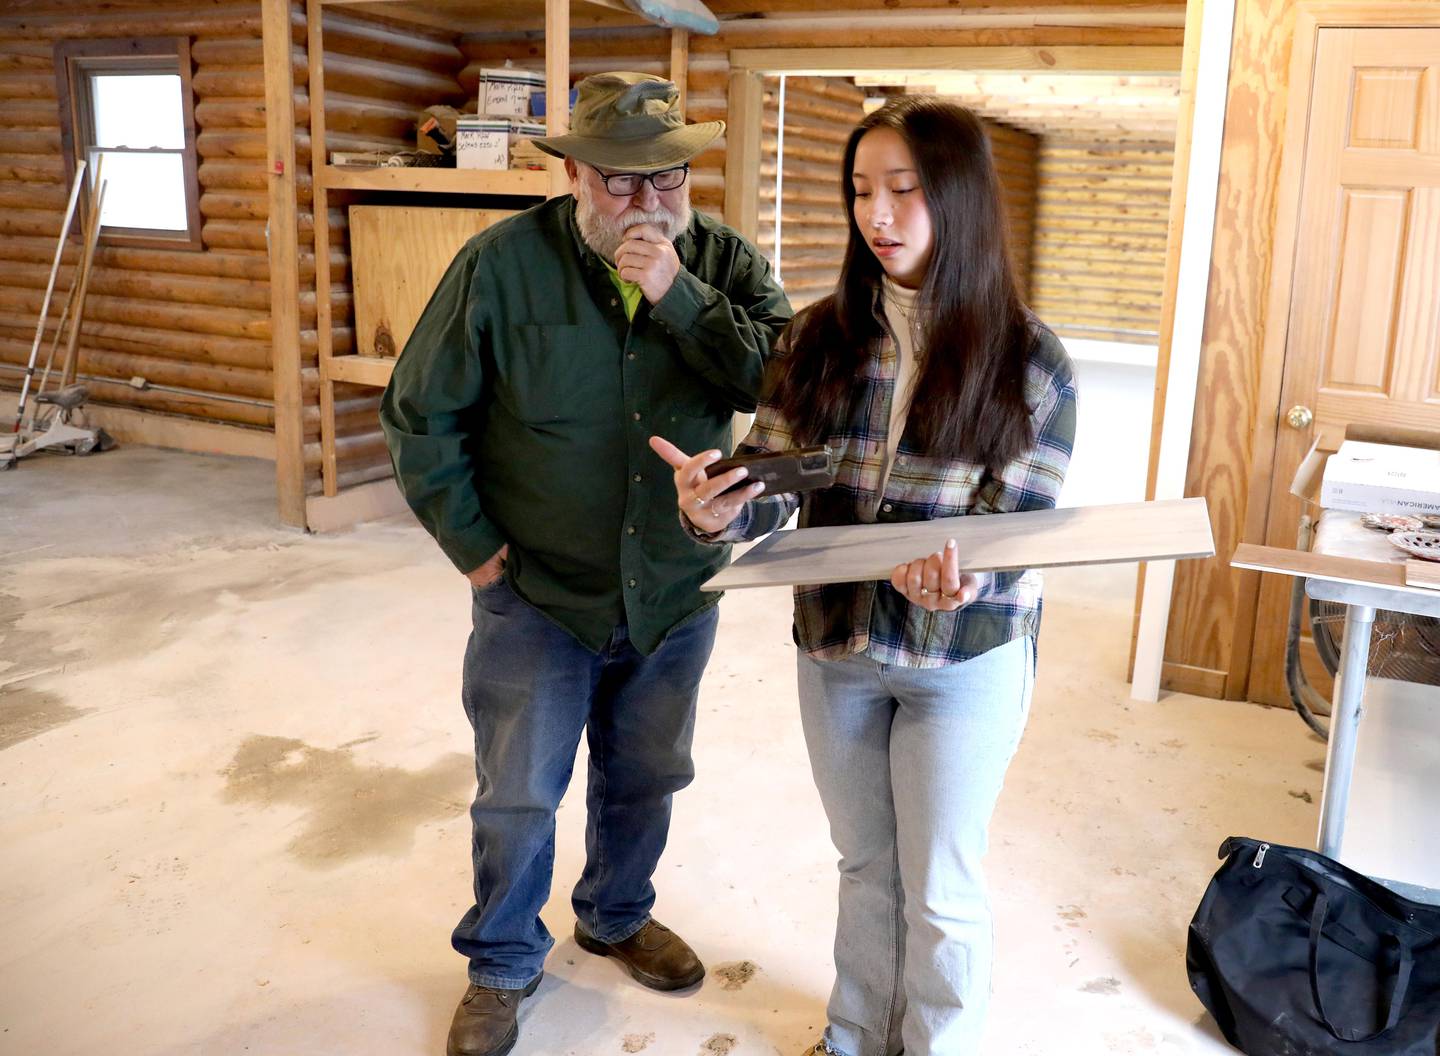 Kaneland High School junior Kaitlin Liu of Sugar Grove works with Charlie Qualls, chief property program officer for Girl Scouts of Northern Illinois at the Tech Camp GSNI  MakerSpace at Camp Dean in Big Rock that will feature robotics, 3D printers, embroiders, laser cutters, laptops, coding, Snap Circuits, rocketry and more. Kailtin is an Ambassador Girl Scout with Troop 1177.